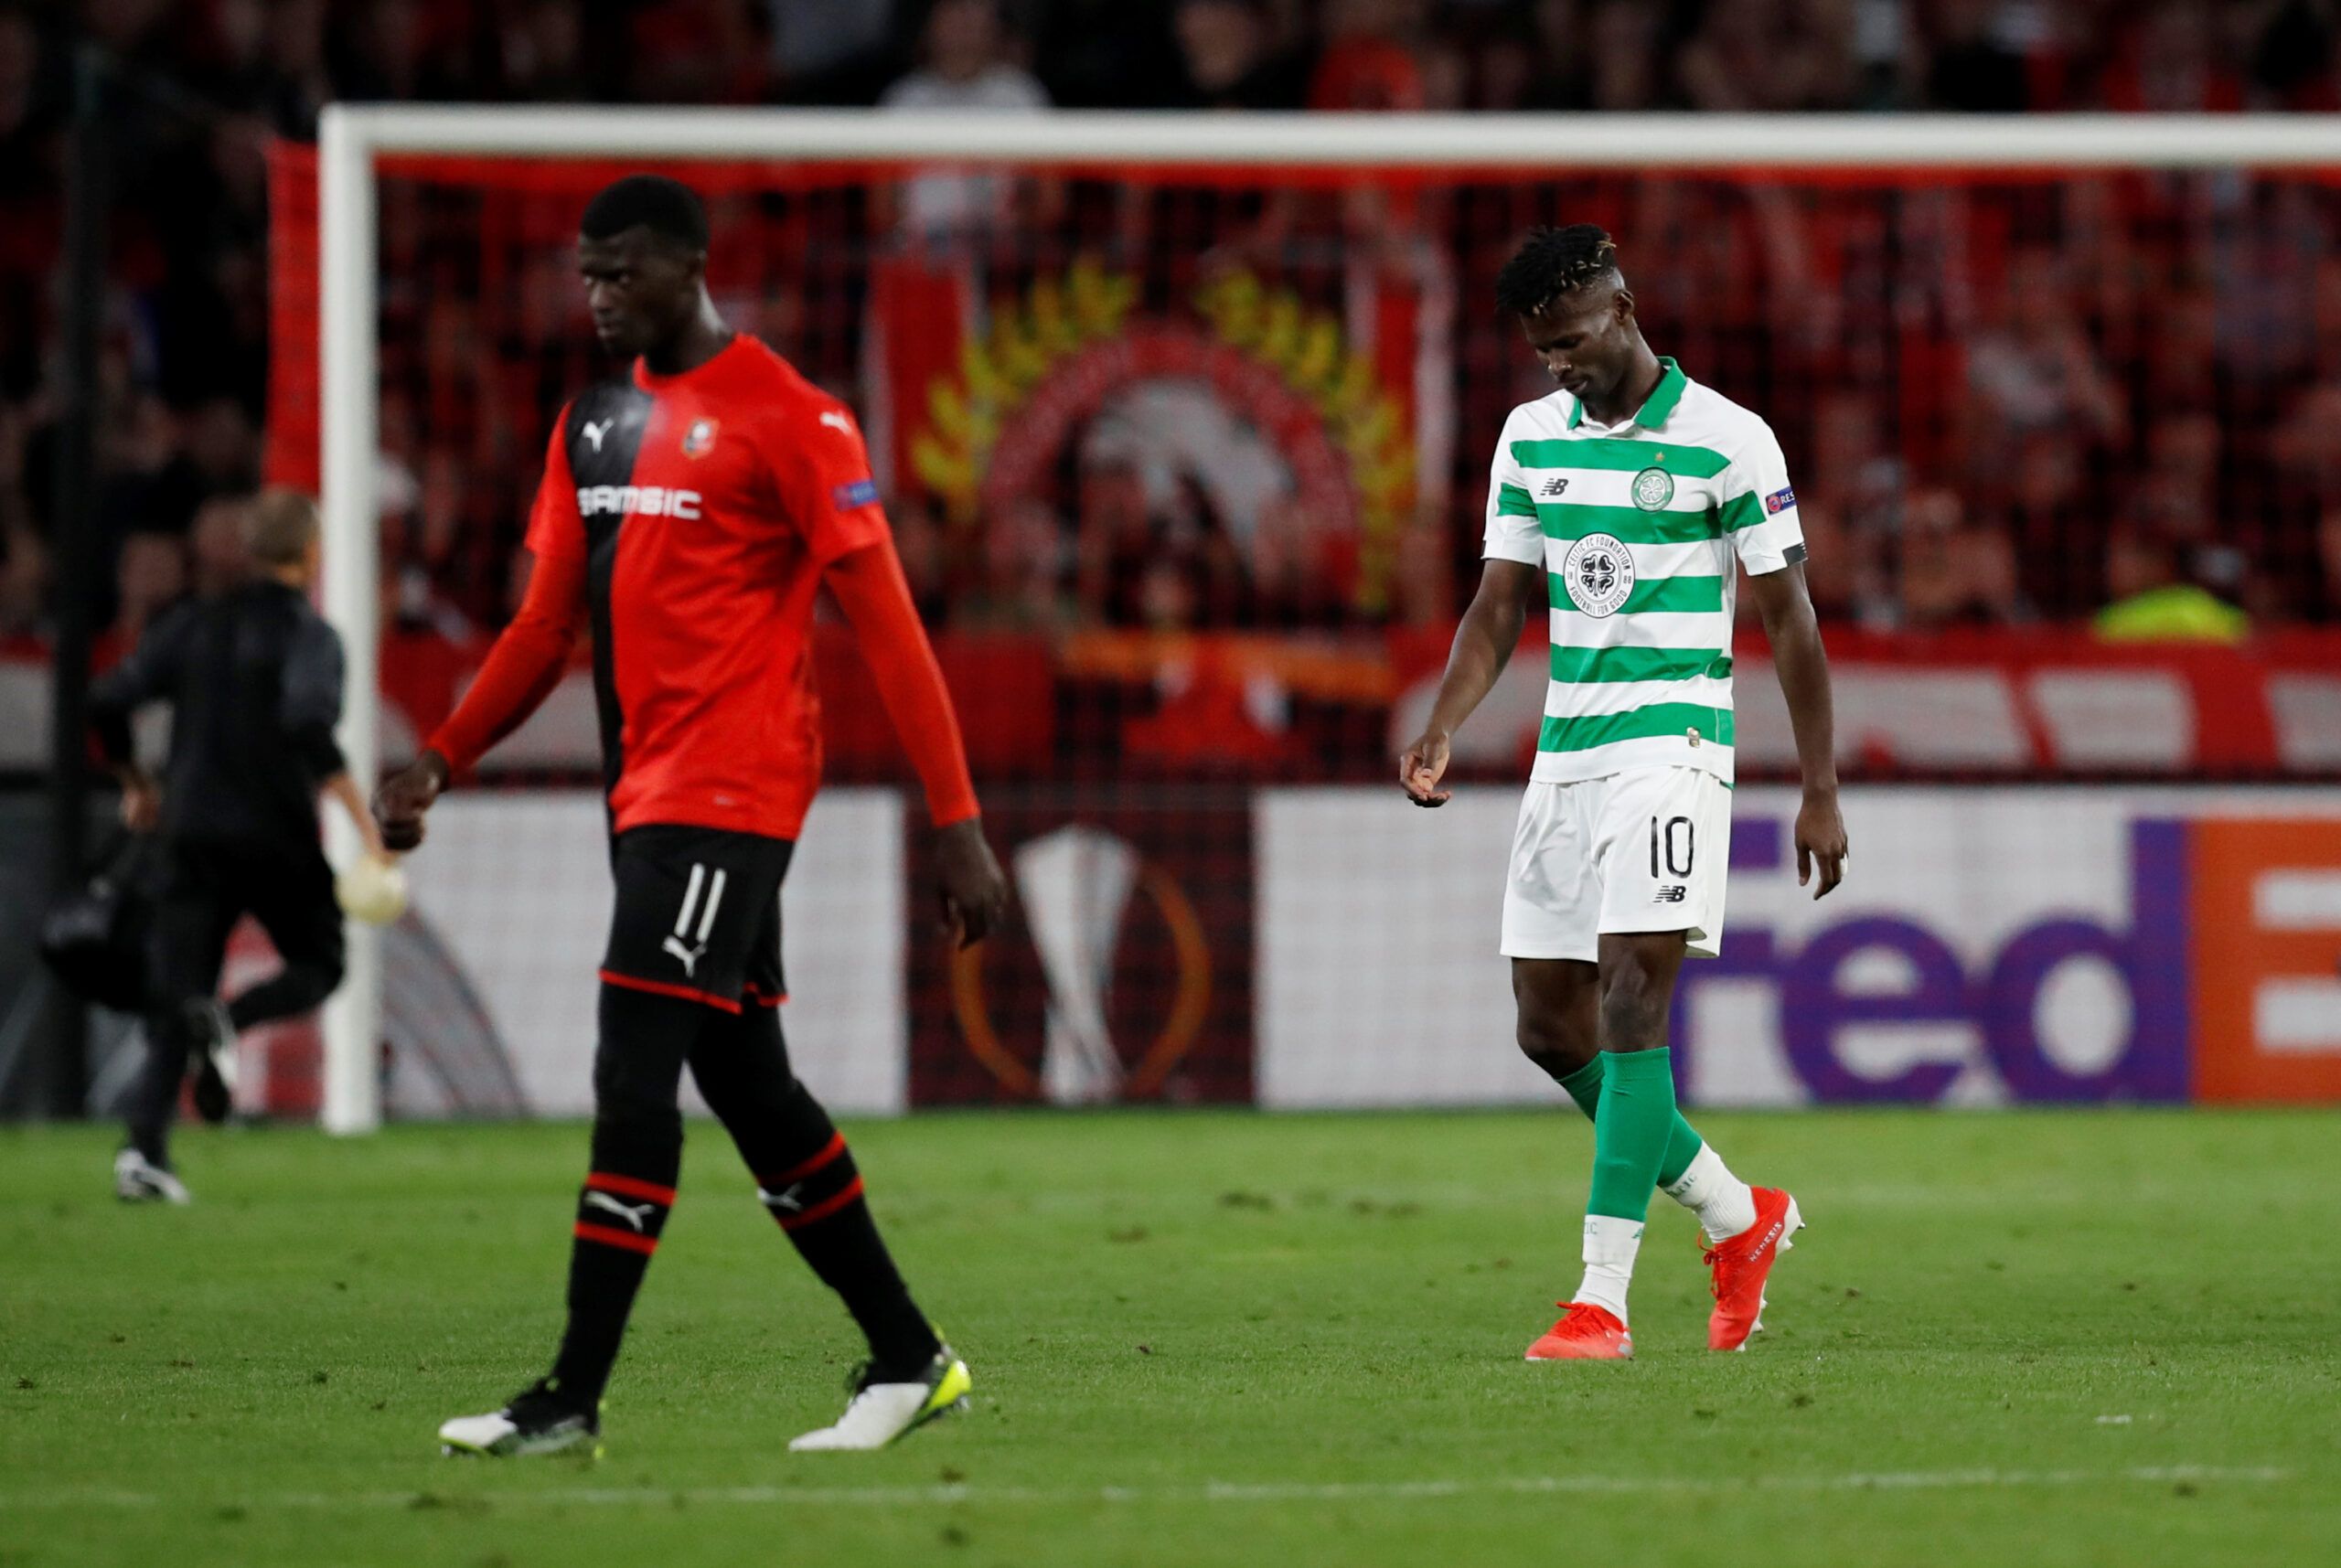 Soccer Football - Europa League - Group E - Stade Rennes v Celtic - Roazhon Park, Rennes, France - September 19, 2019  Celtic's Vakoun Issouf Bayo leaves the pitch after he is sent off by referee Jose Maria Sanchez  REUTERS/Stephane Mahe